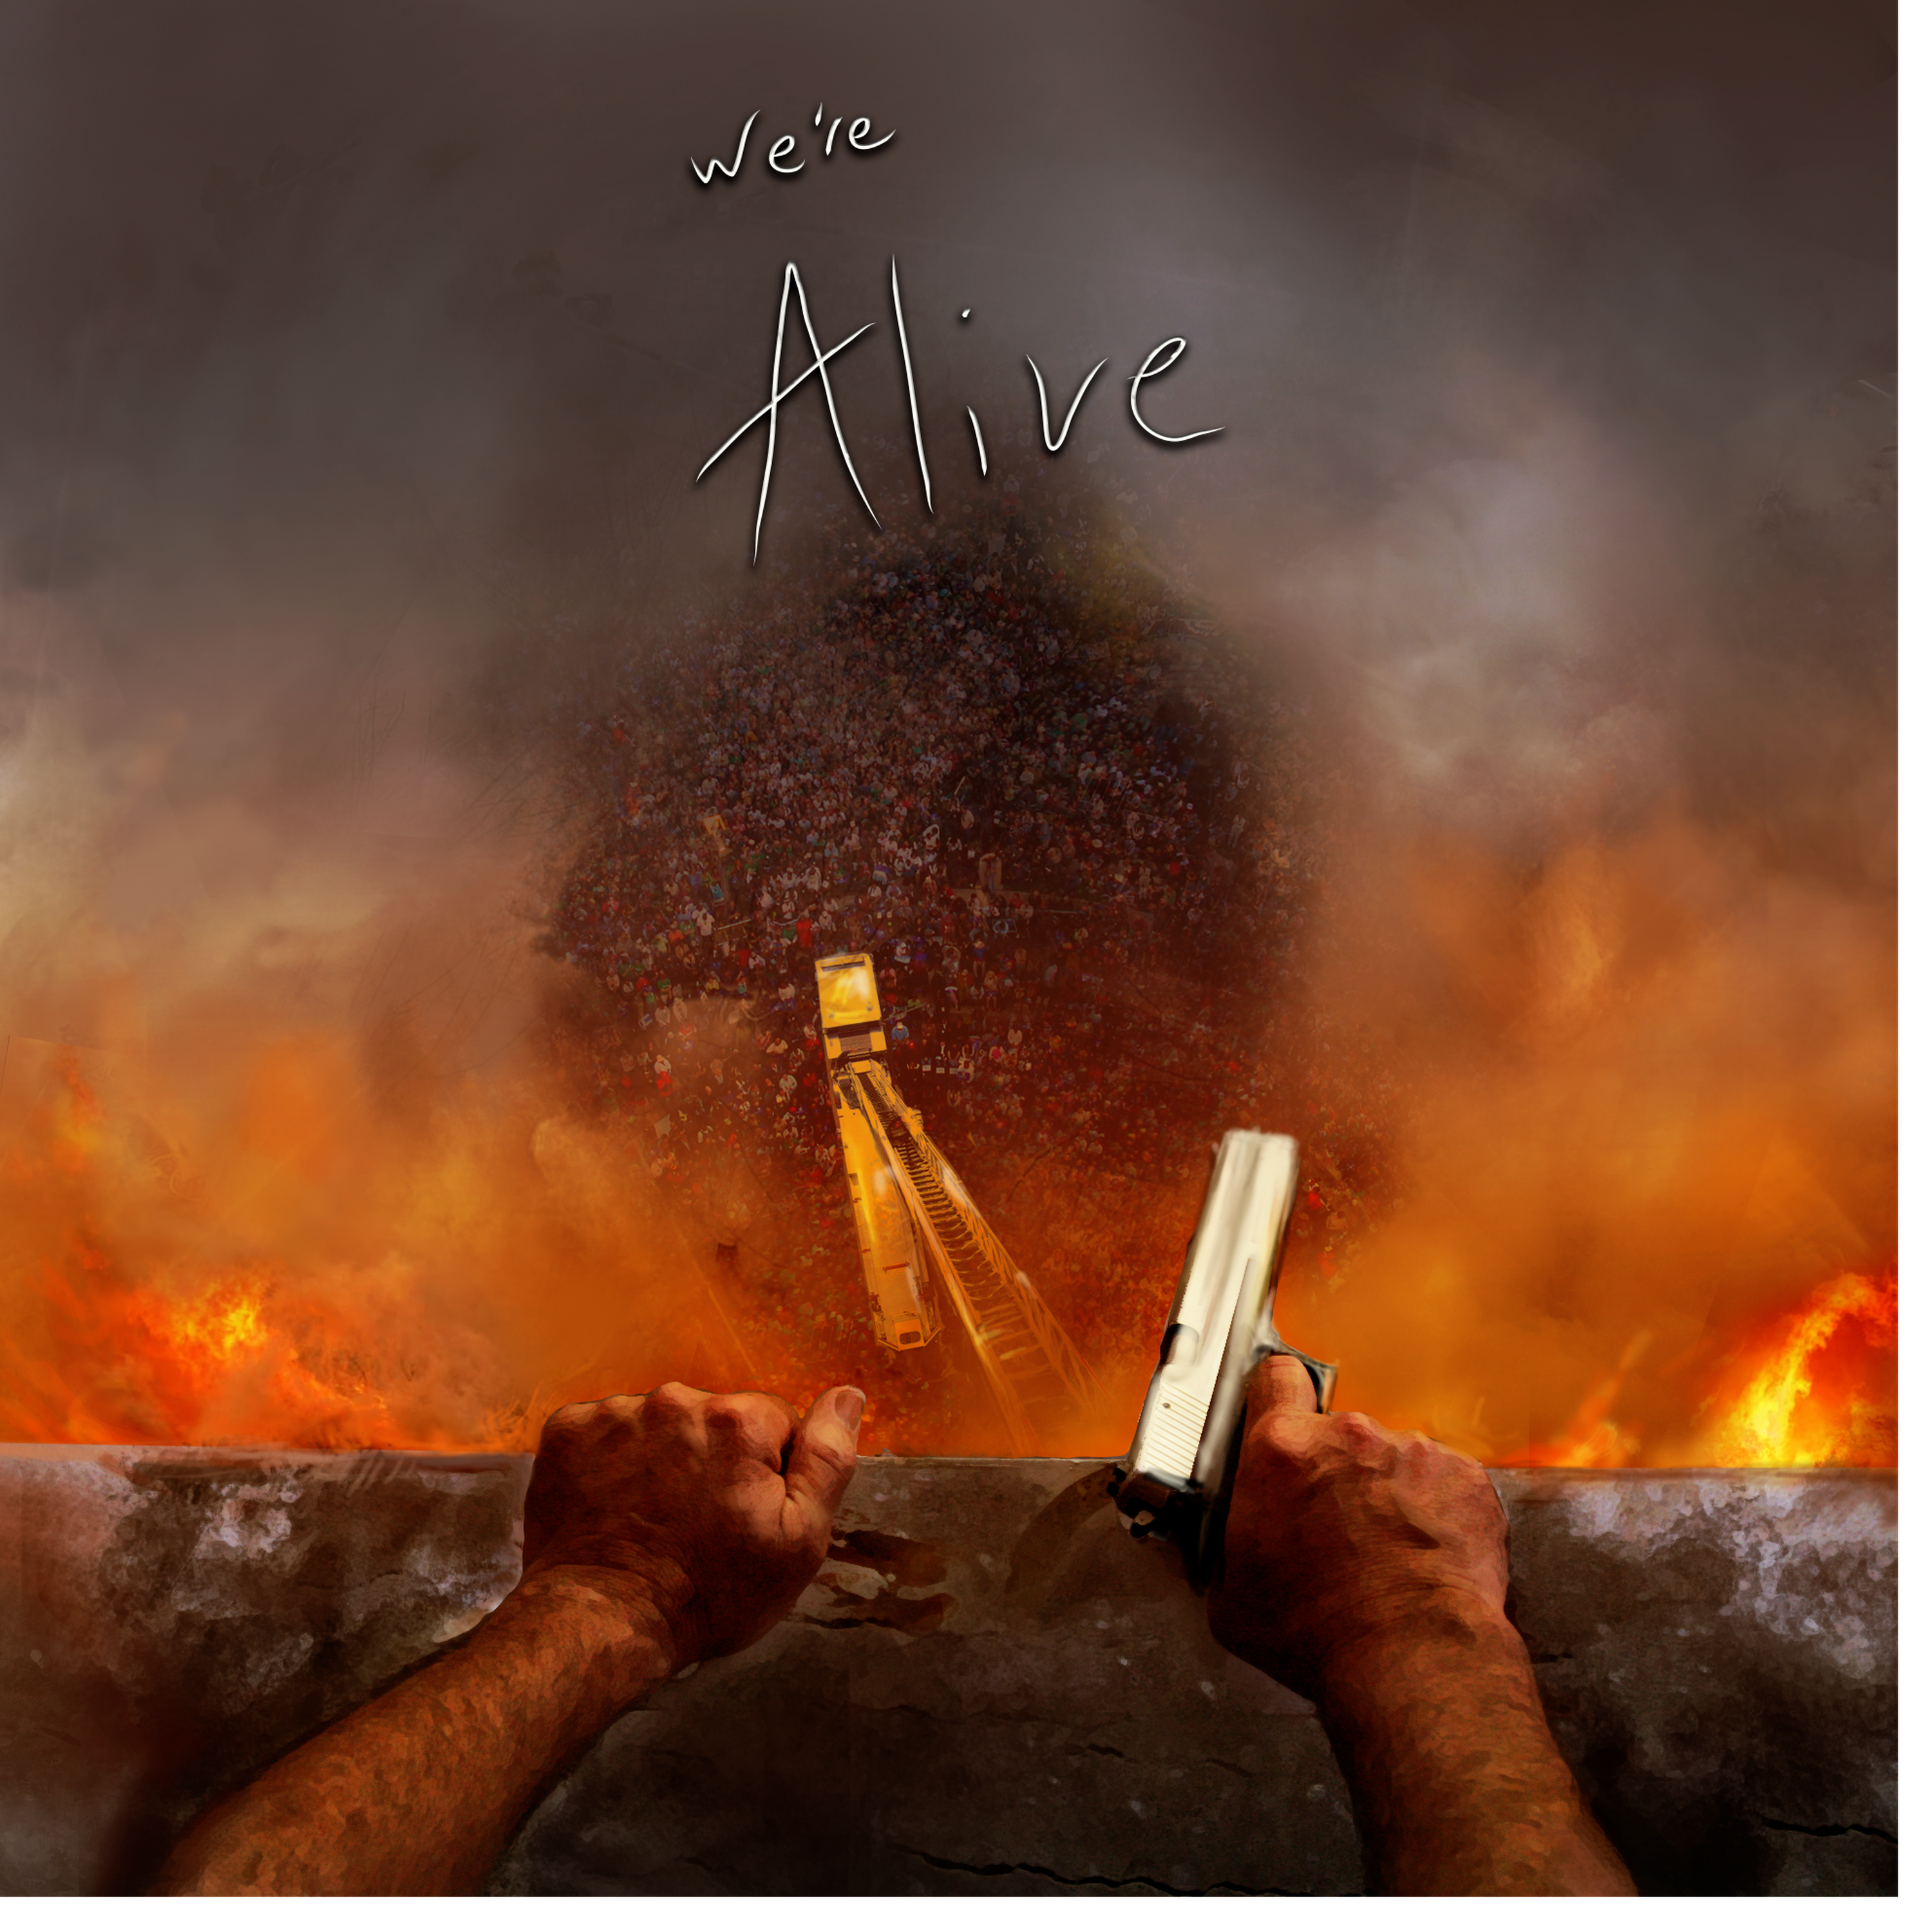 "We're Alive" Podcast